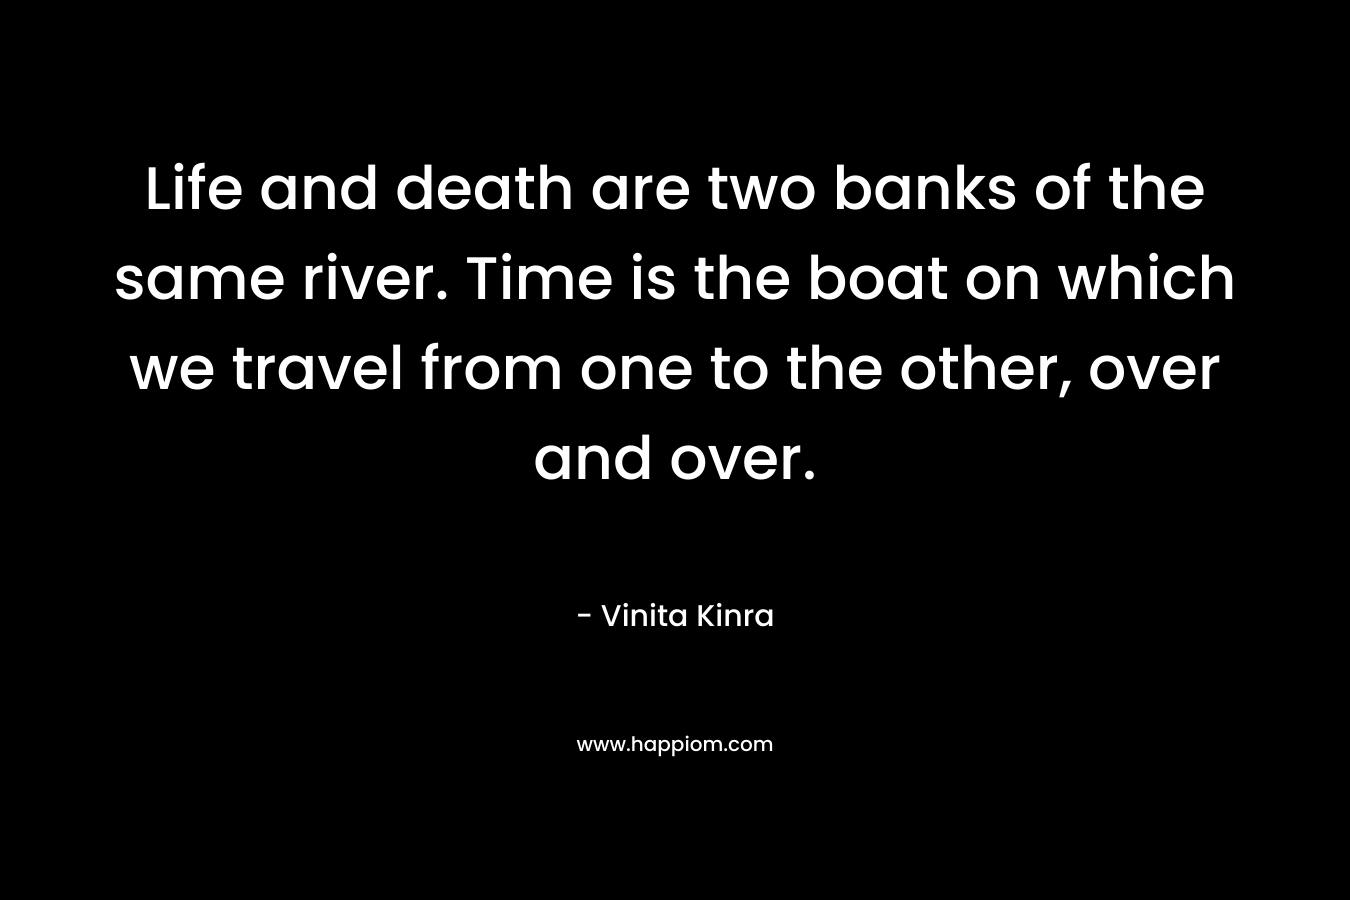 Life and death are two banks of the same river. Time is the boat on which we travel from one to the other, over and over.